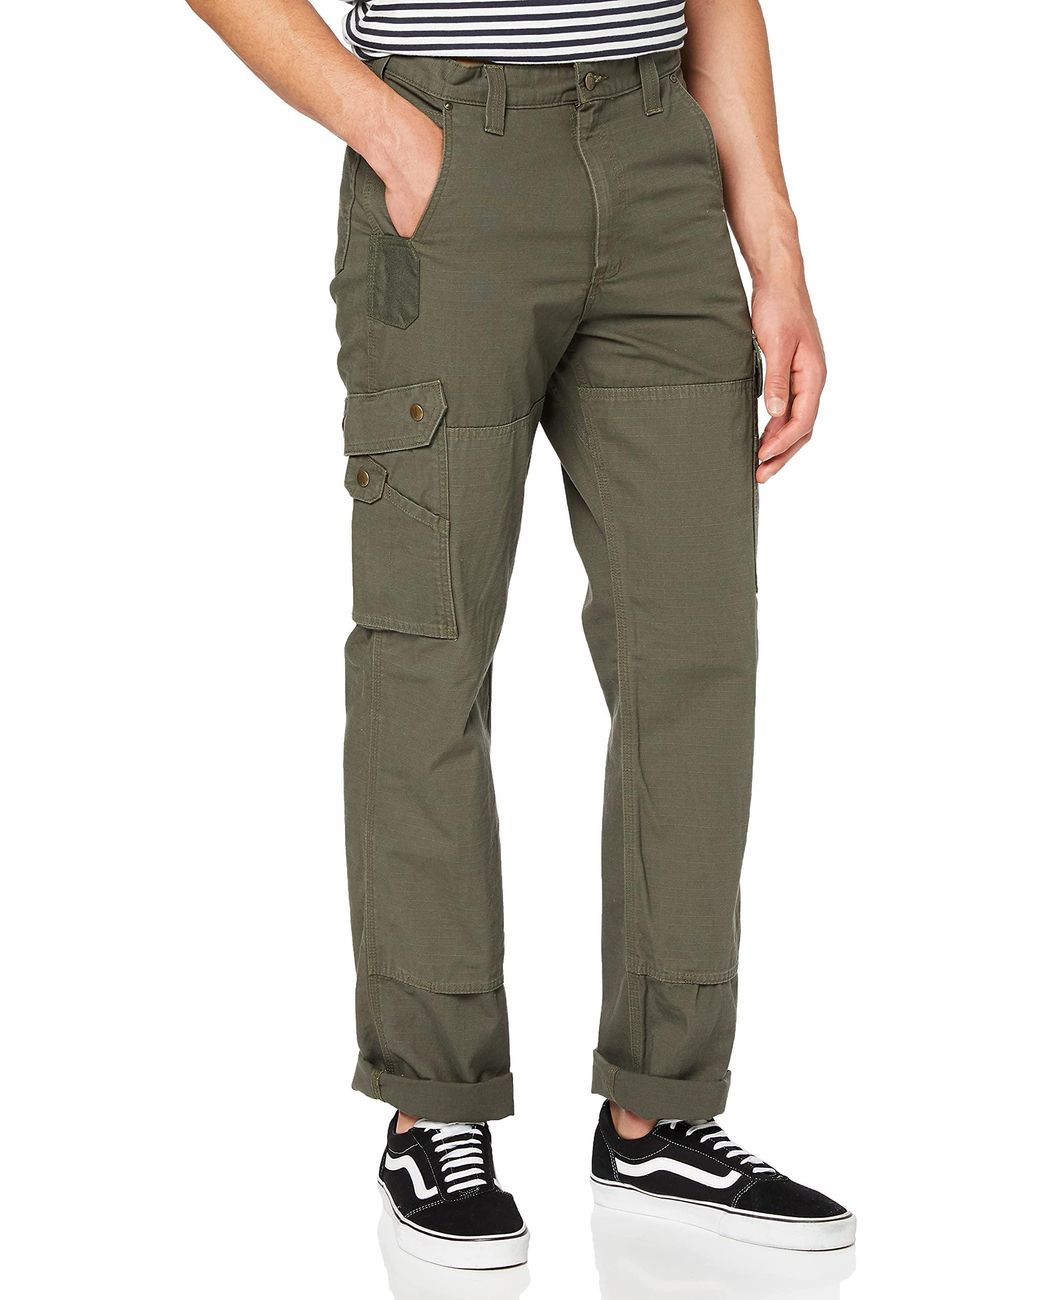 Carhartt Ripstop Cargo Work Pant in Moss (Green) for Men - Save 10% | Lyst